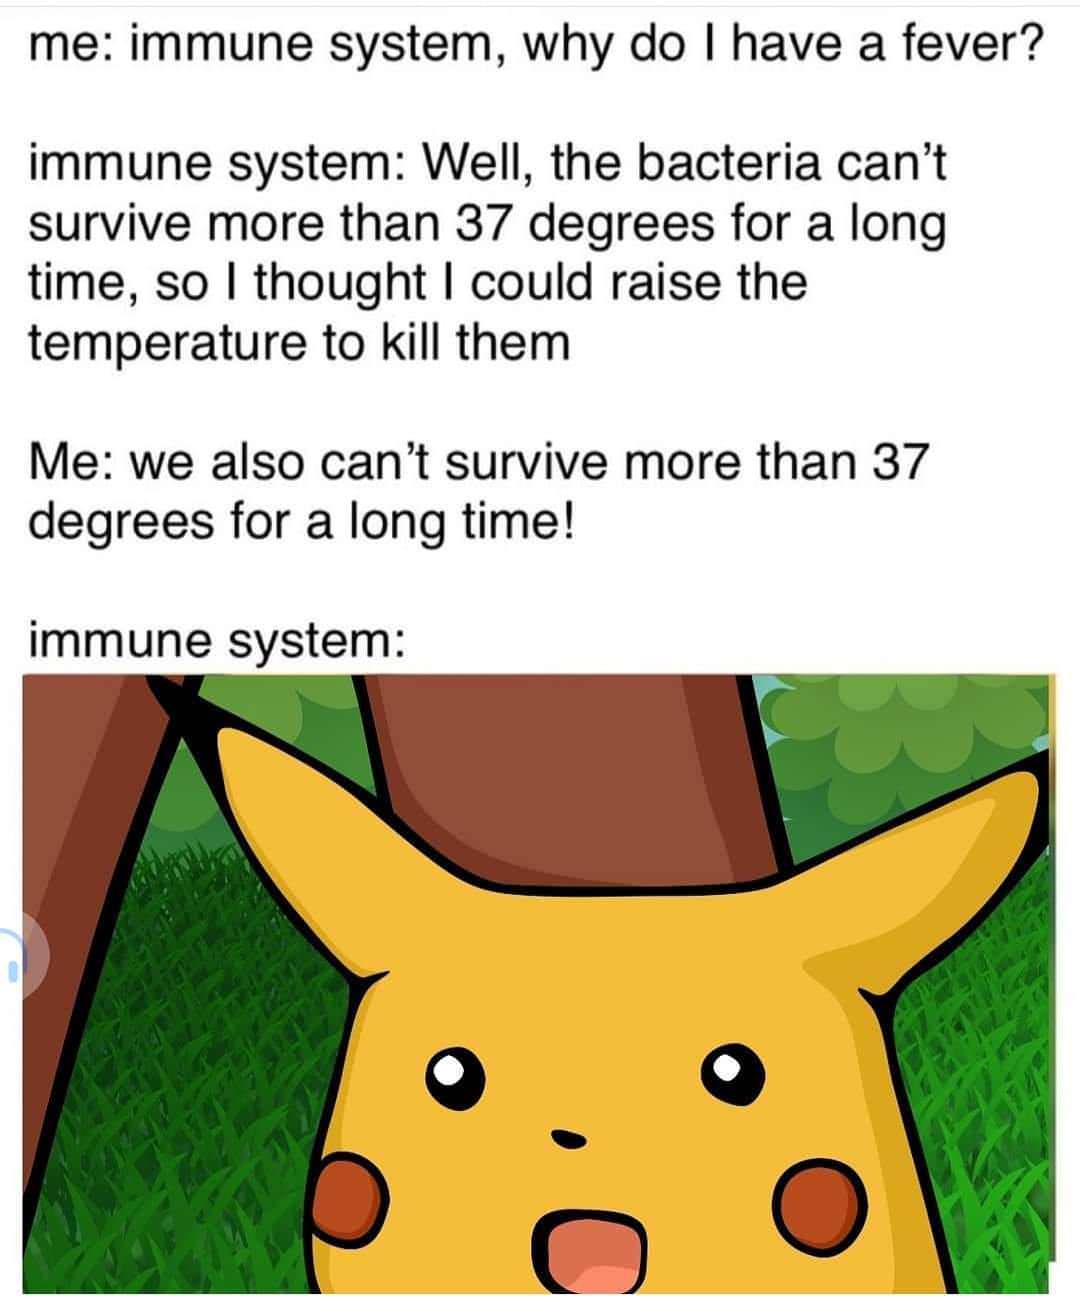 immune system meme - me immune system, why do I have a fever? immune system Well, the bacteria can't survive more than 37 degrees for a long time, so I thought I could raise the temperature to kill them Me we also can't survive more than 37 degrees for a 